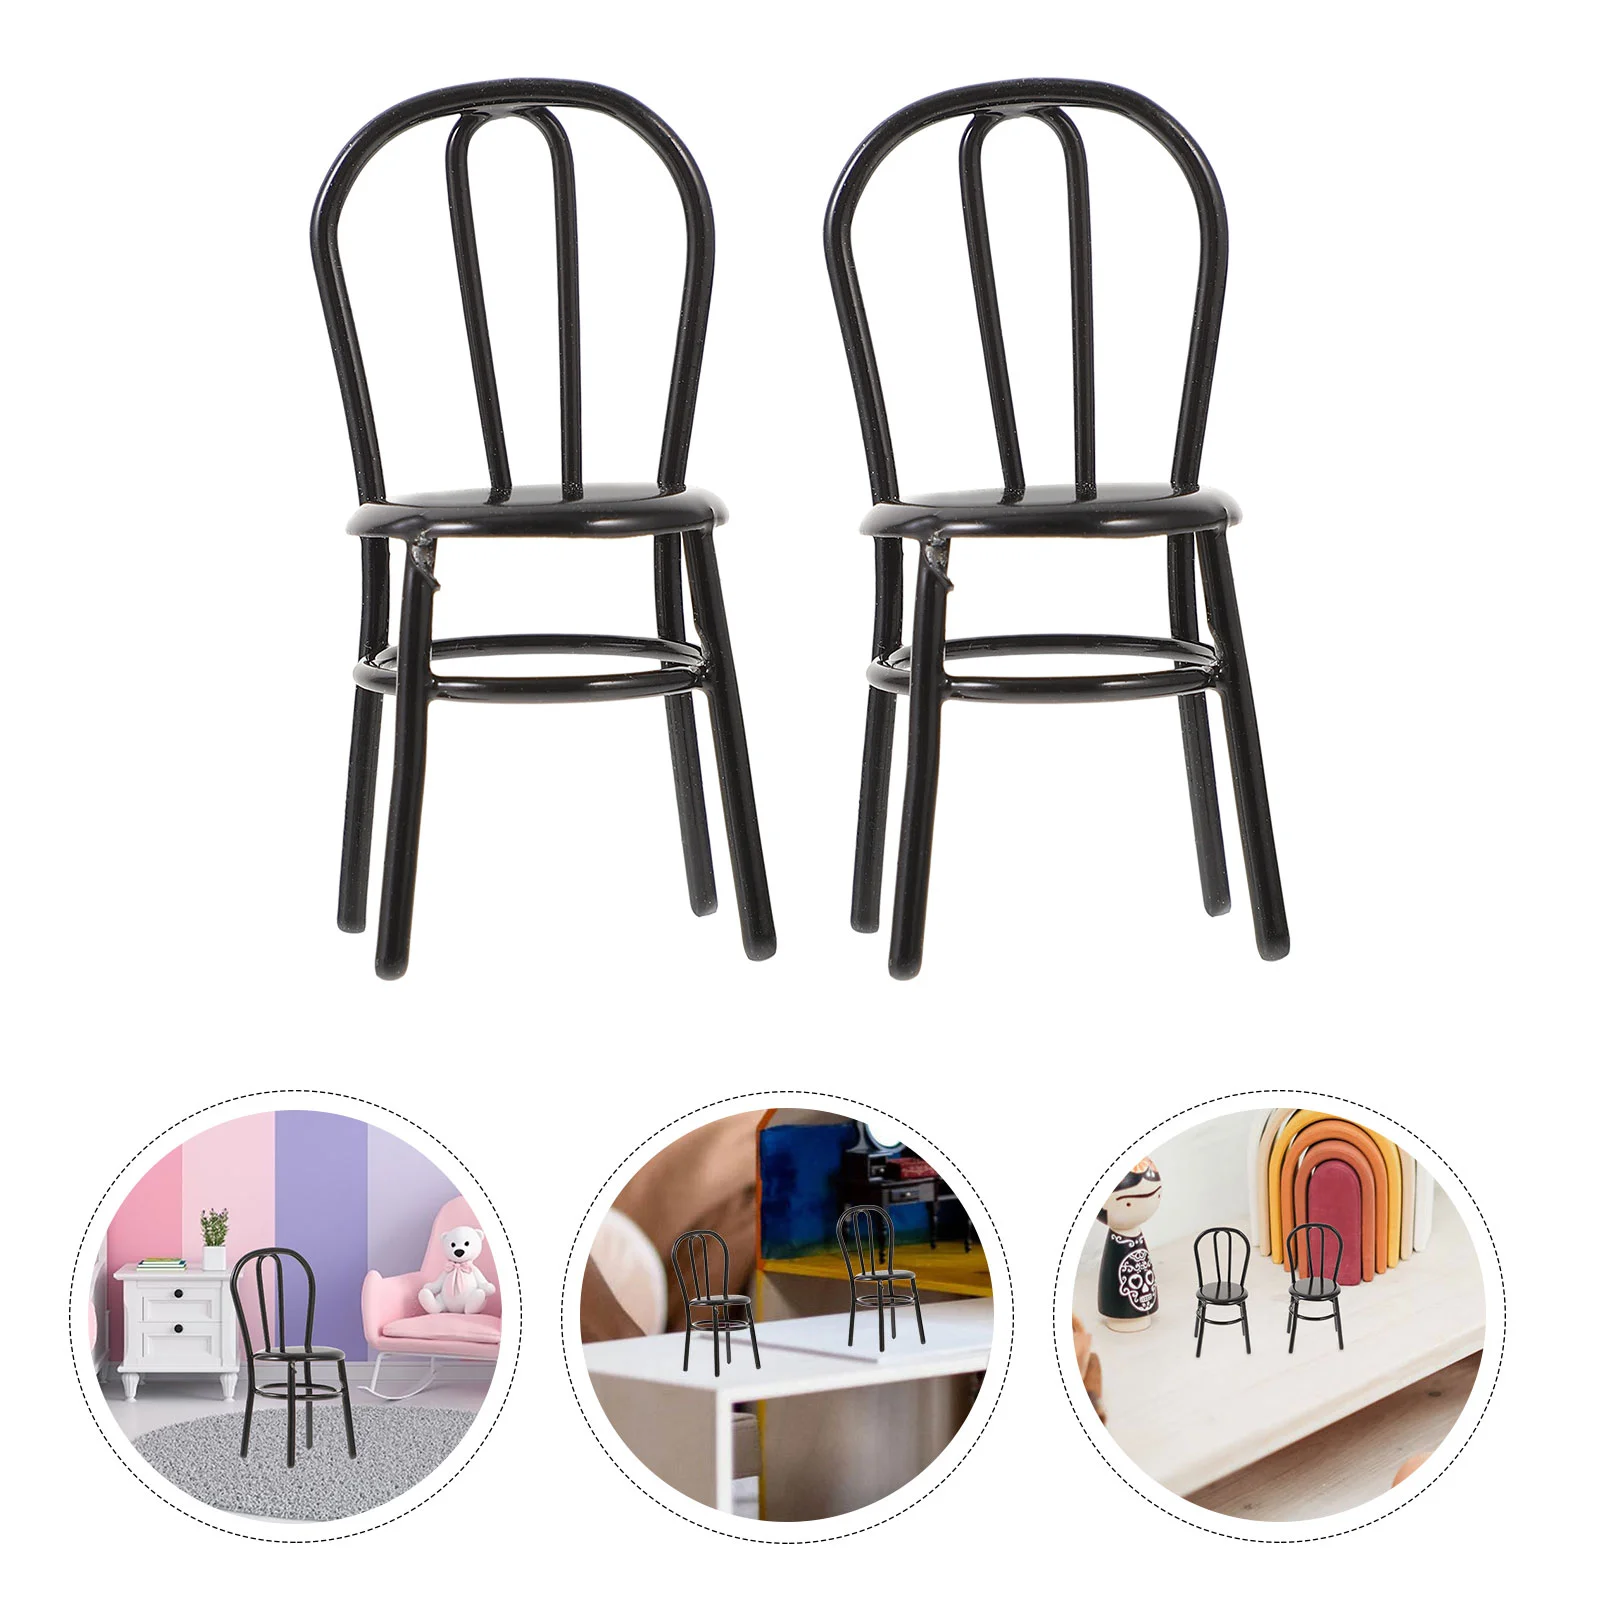 

2 Pcs Lovely Mini House Decor Landscaping Chair Accessory Realistic Toy Decorative Miniature Furniture Delicate